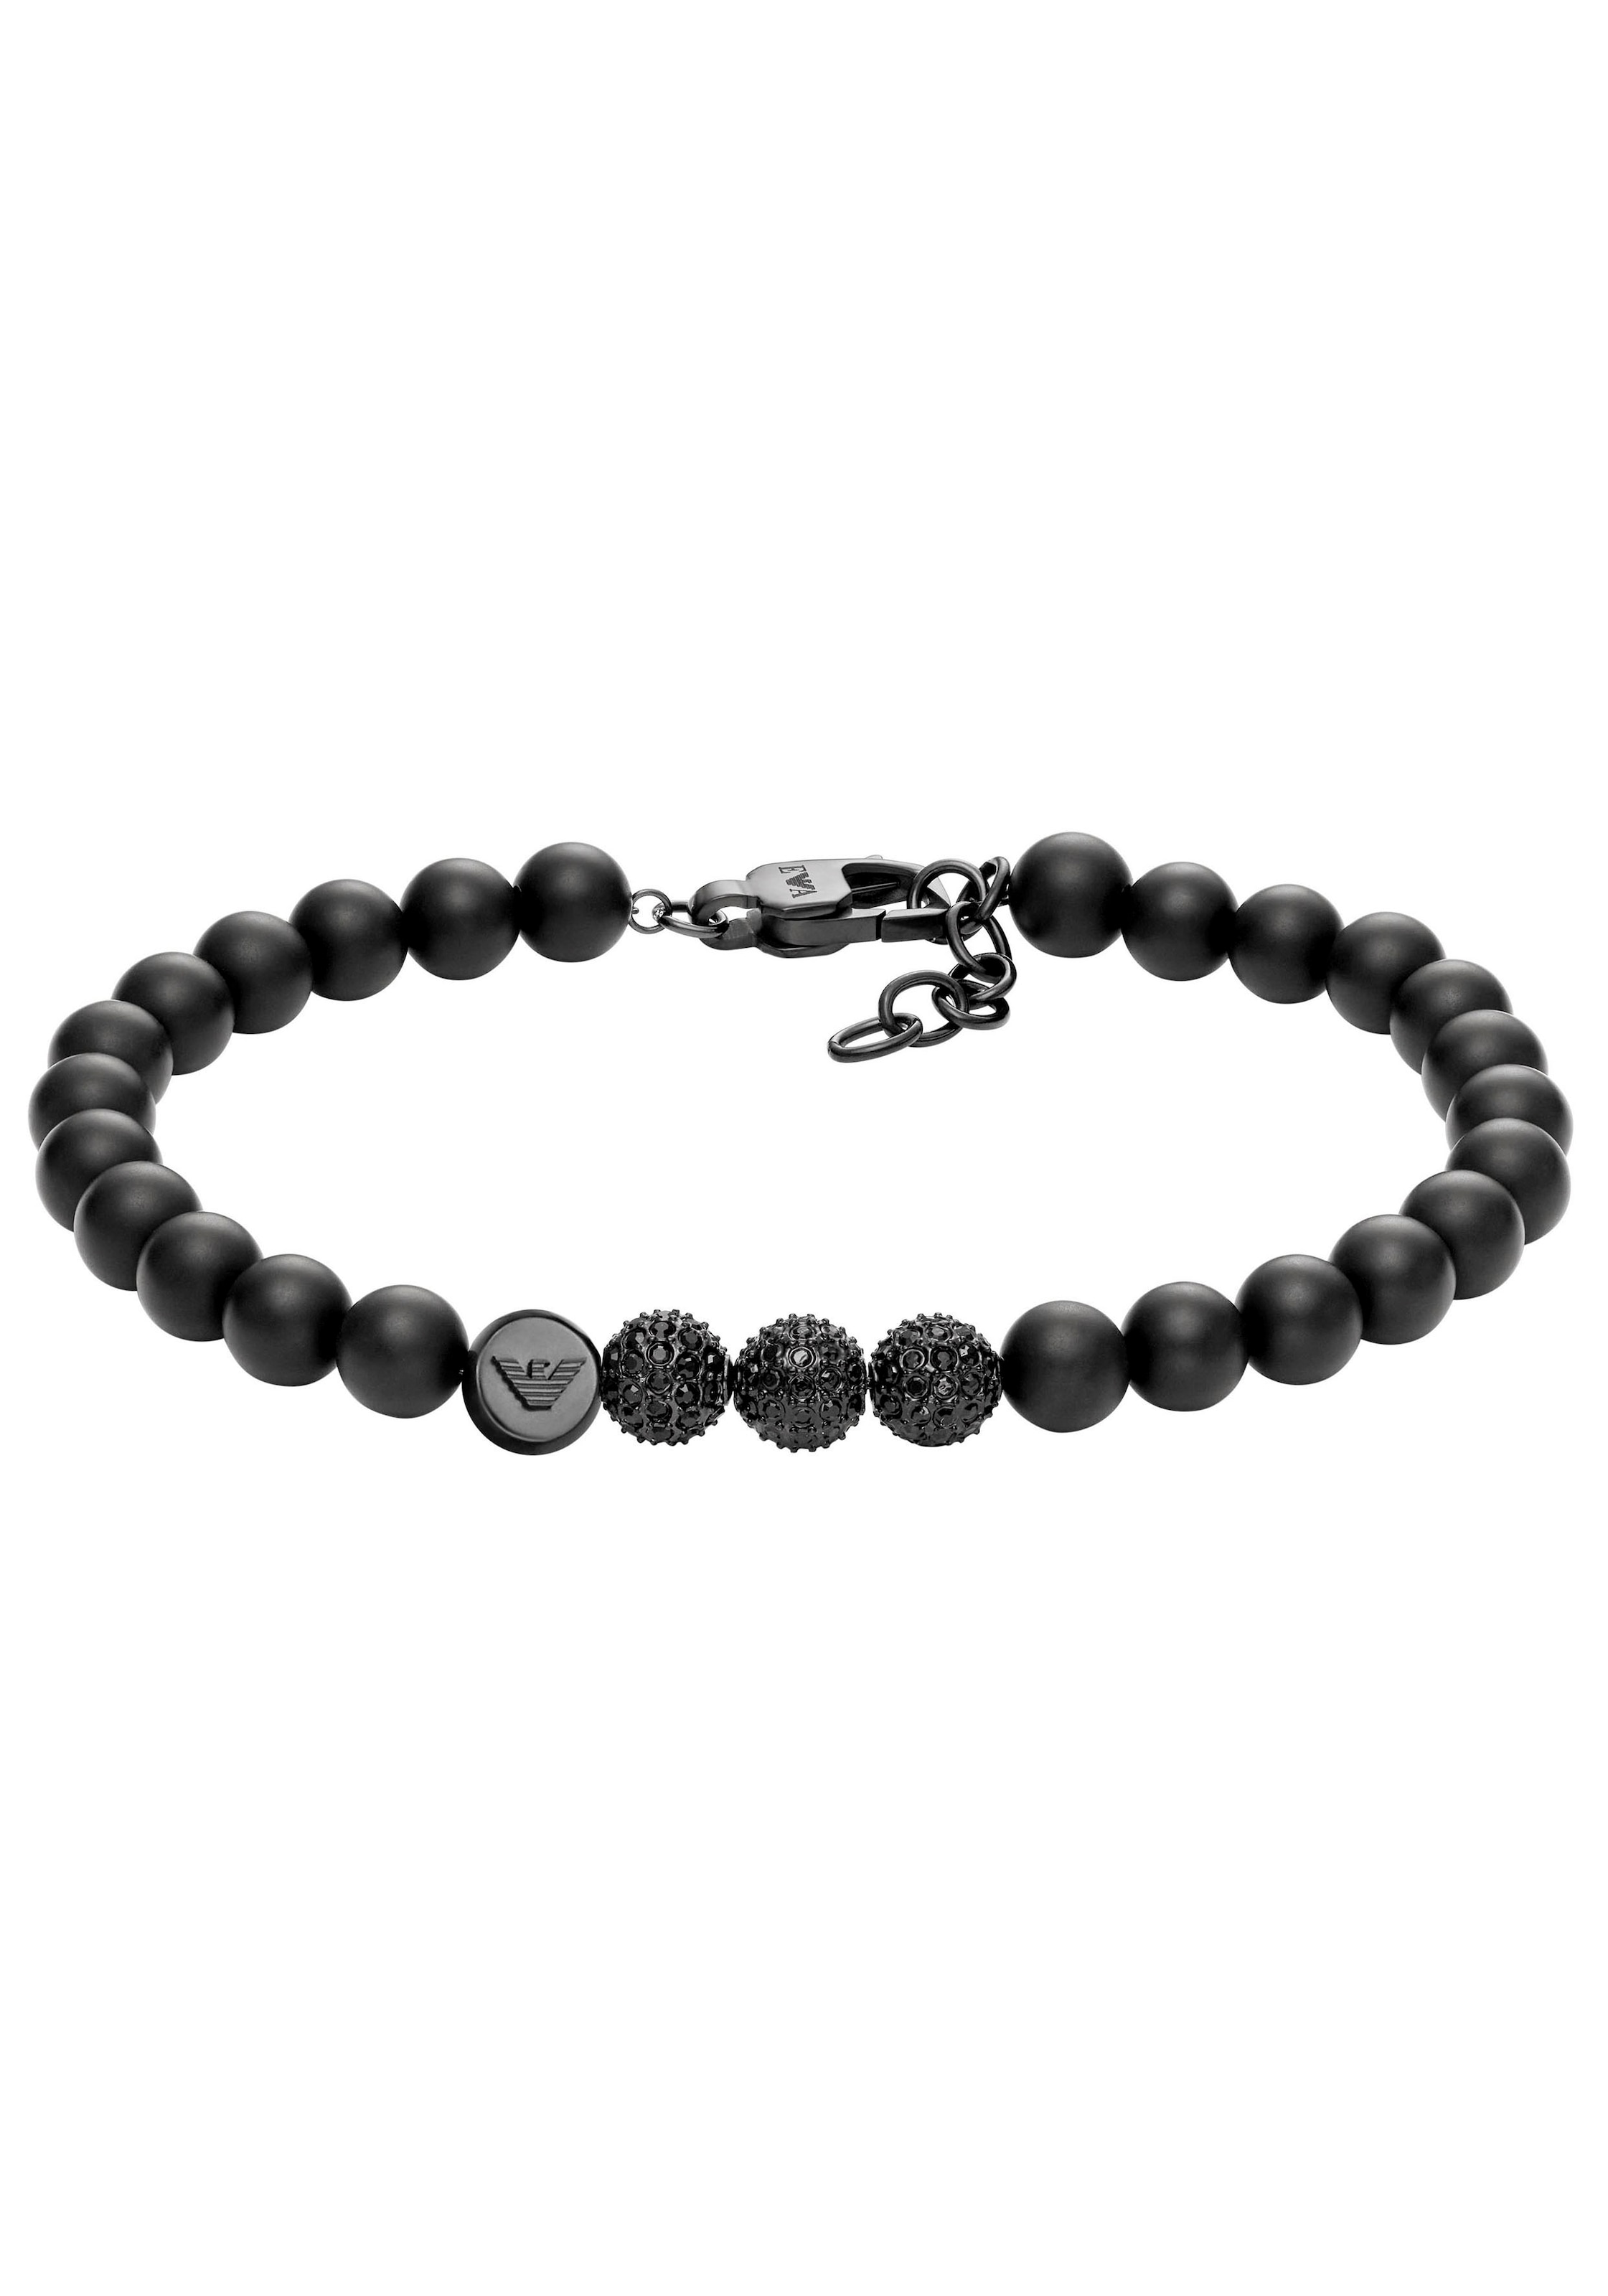 Onyx PAVE, »ICONIC Armani Armband Emporio | AND mit BAUR EGS3030001«, TREND, Gagat BEADS und